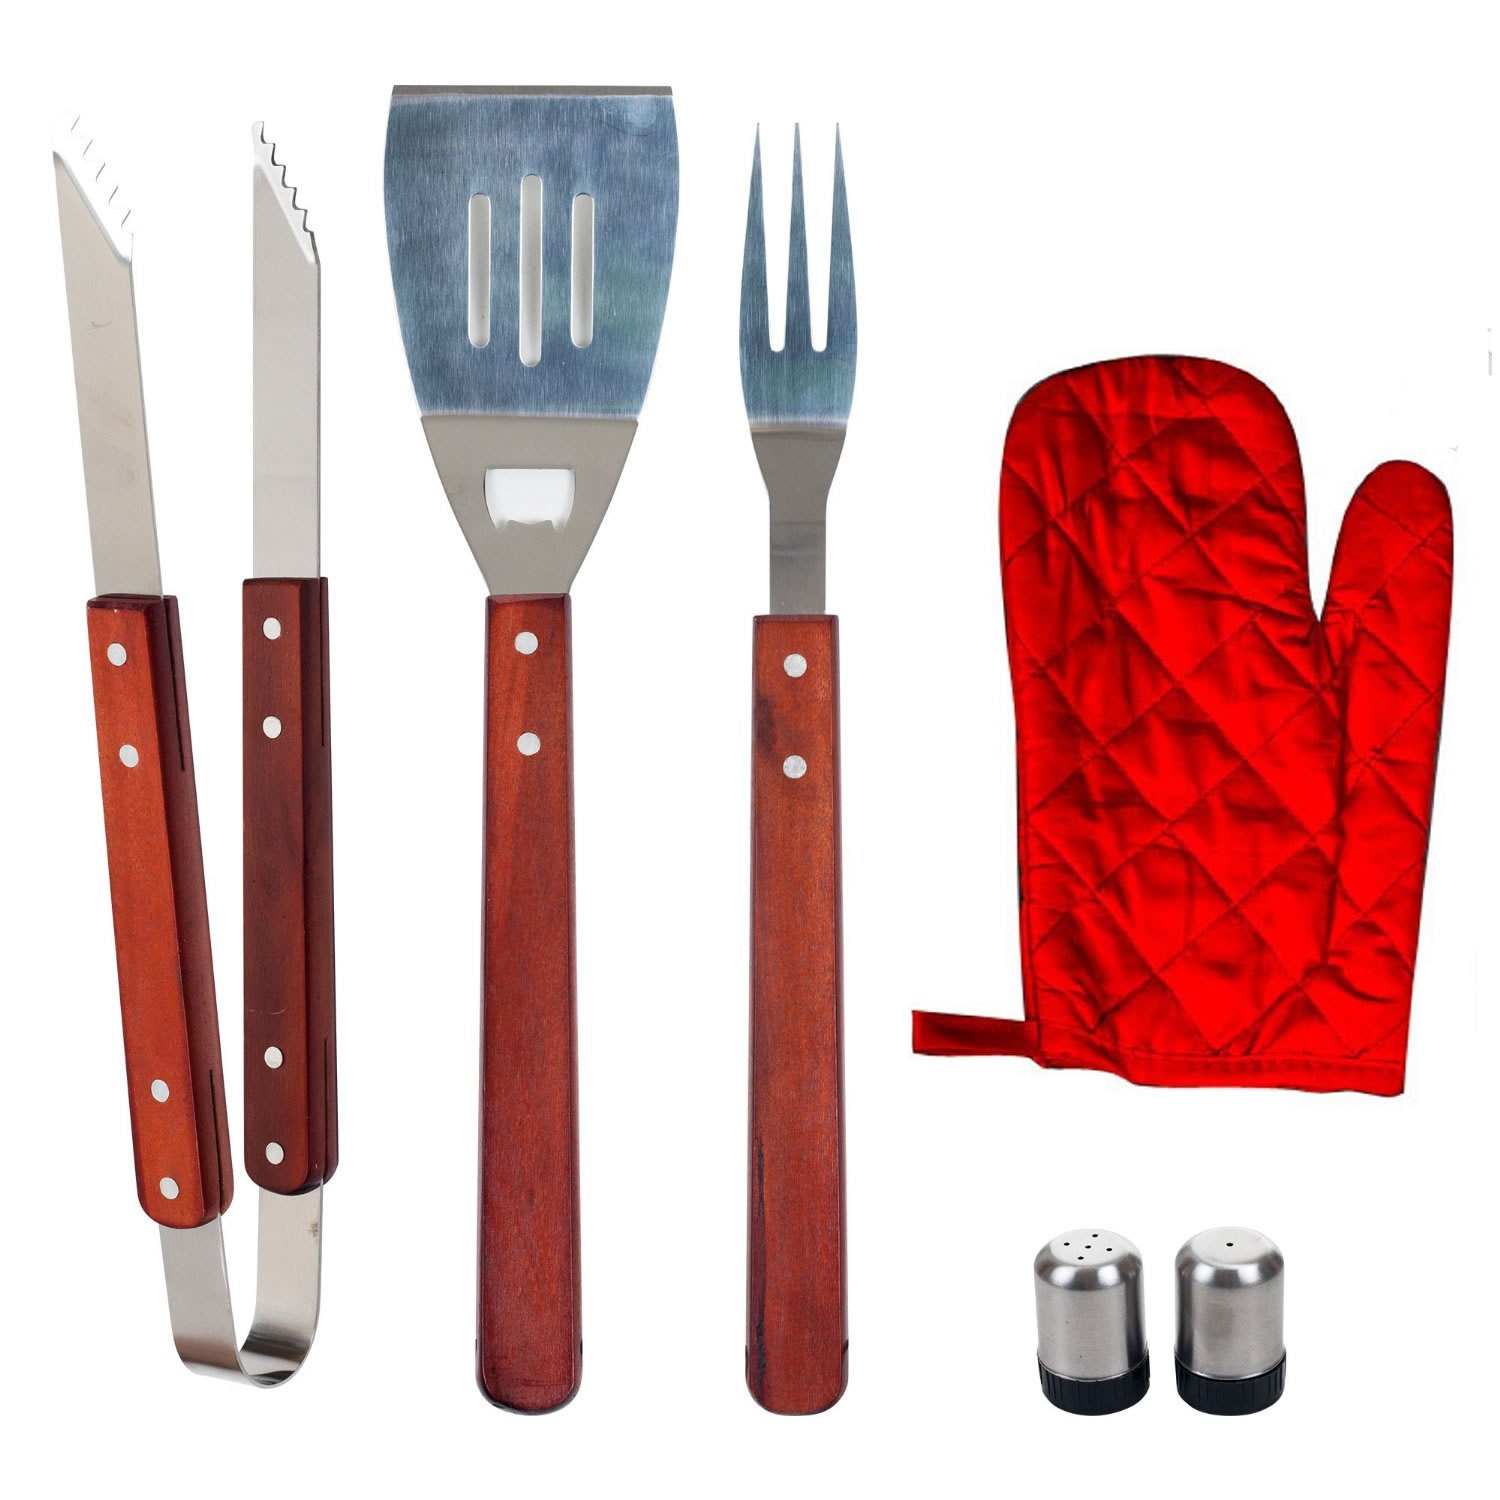 High quality and low price Stainless Steel BBQ Set come from Kitchenware Supplier china